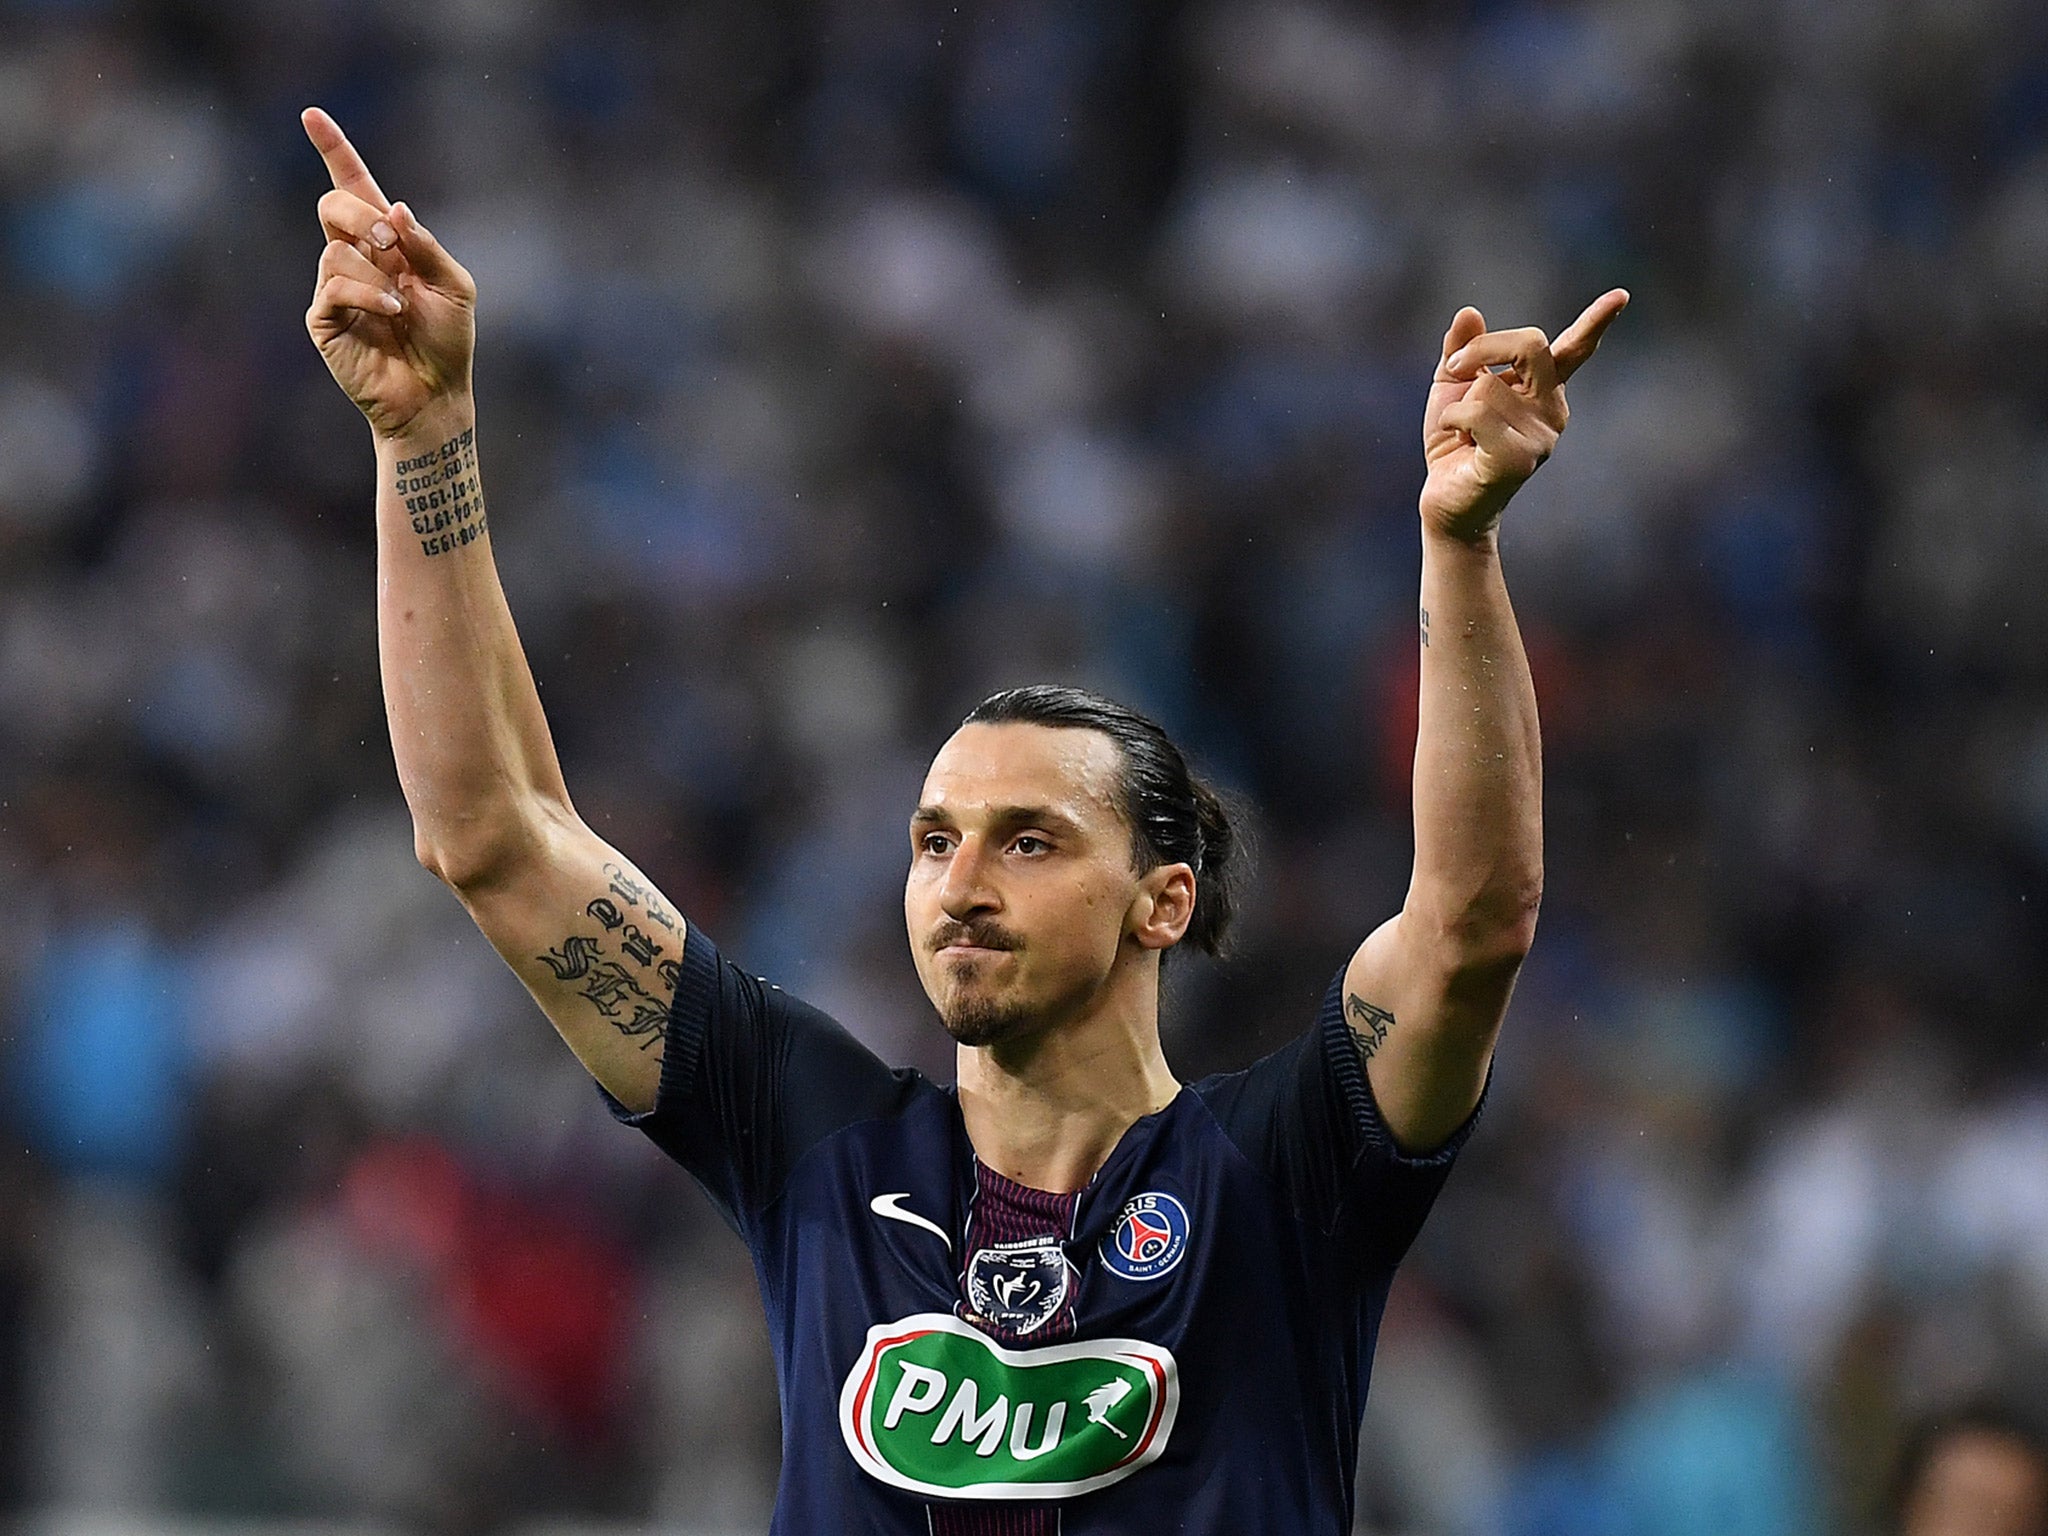 Zlatan Ibrahimovic could be confirmed as a Manchester United player within the next week